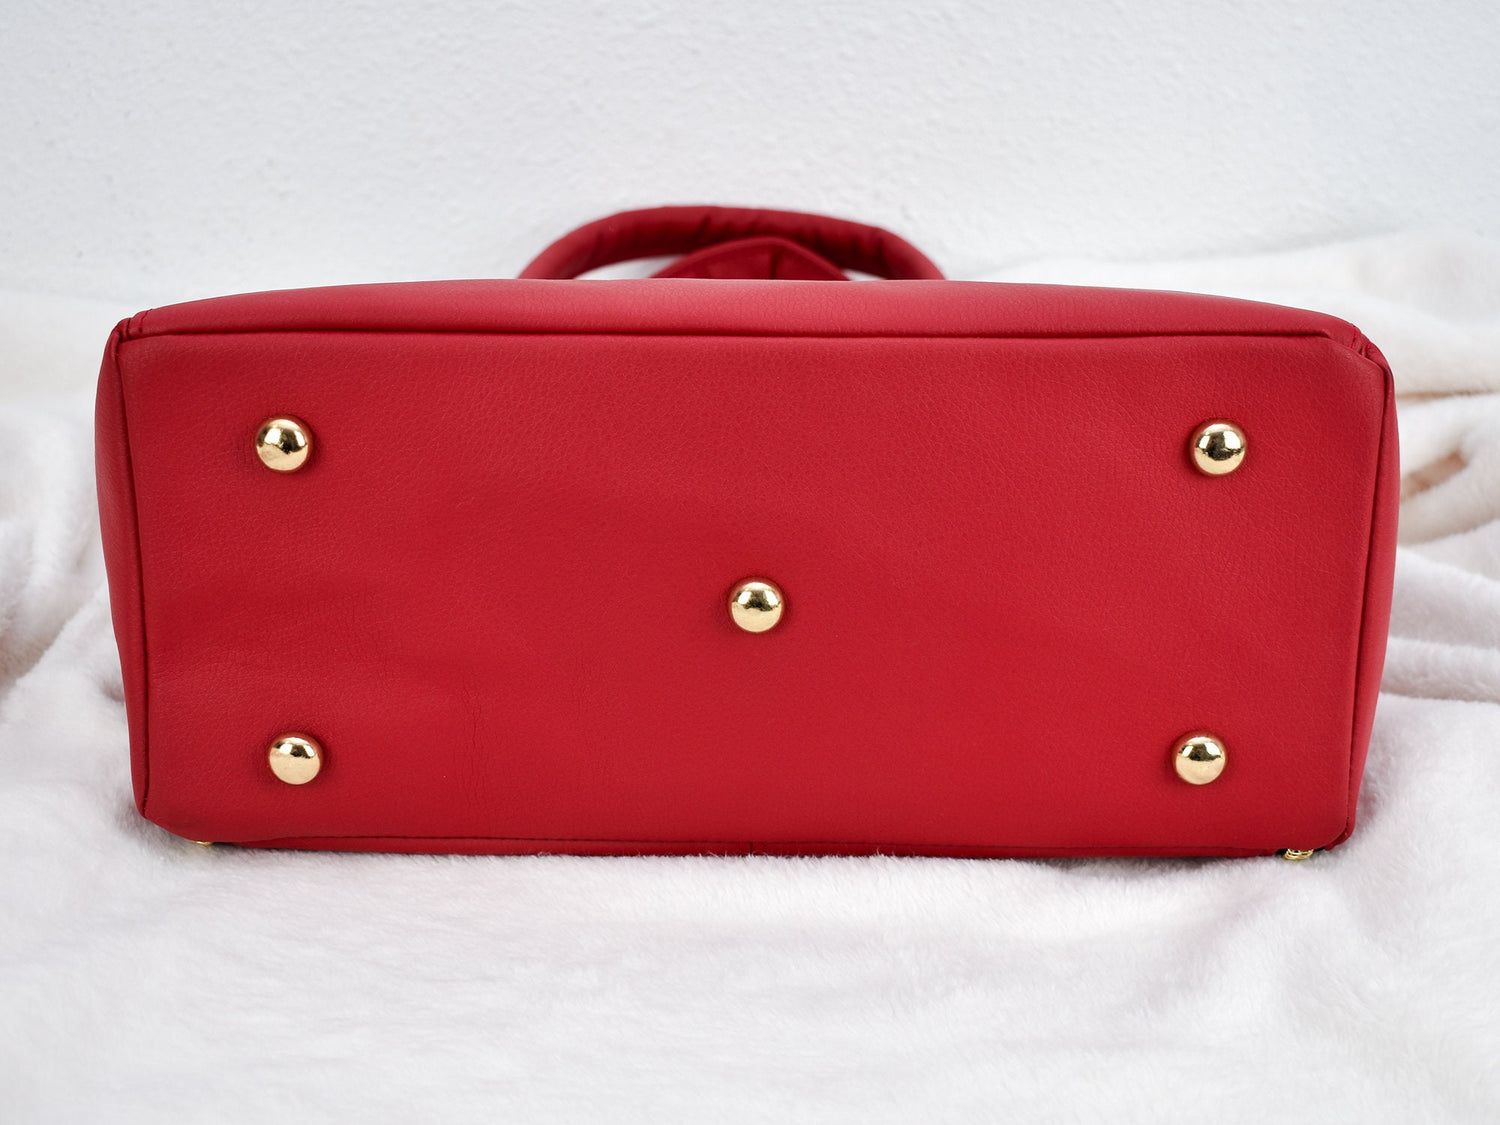 Red Faux Leather Purse - Conceal Carry Handbag - Gift for Mom Grandma Sister -  Eco Friendly Top Handle Tote Bag - CCW - Customizable to Her